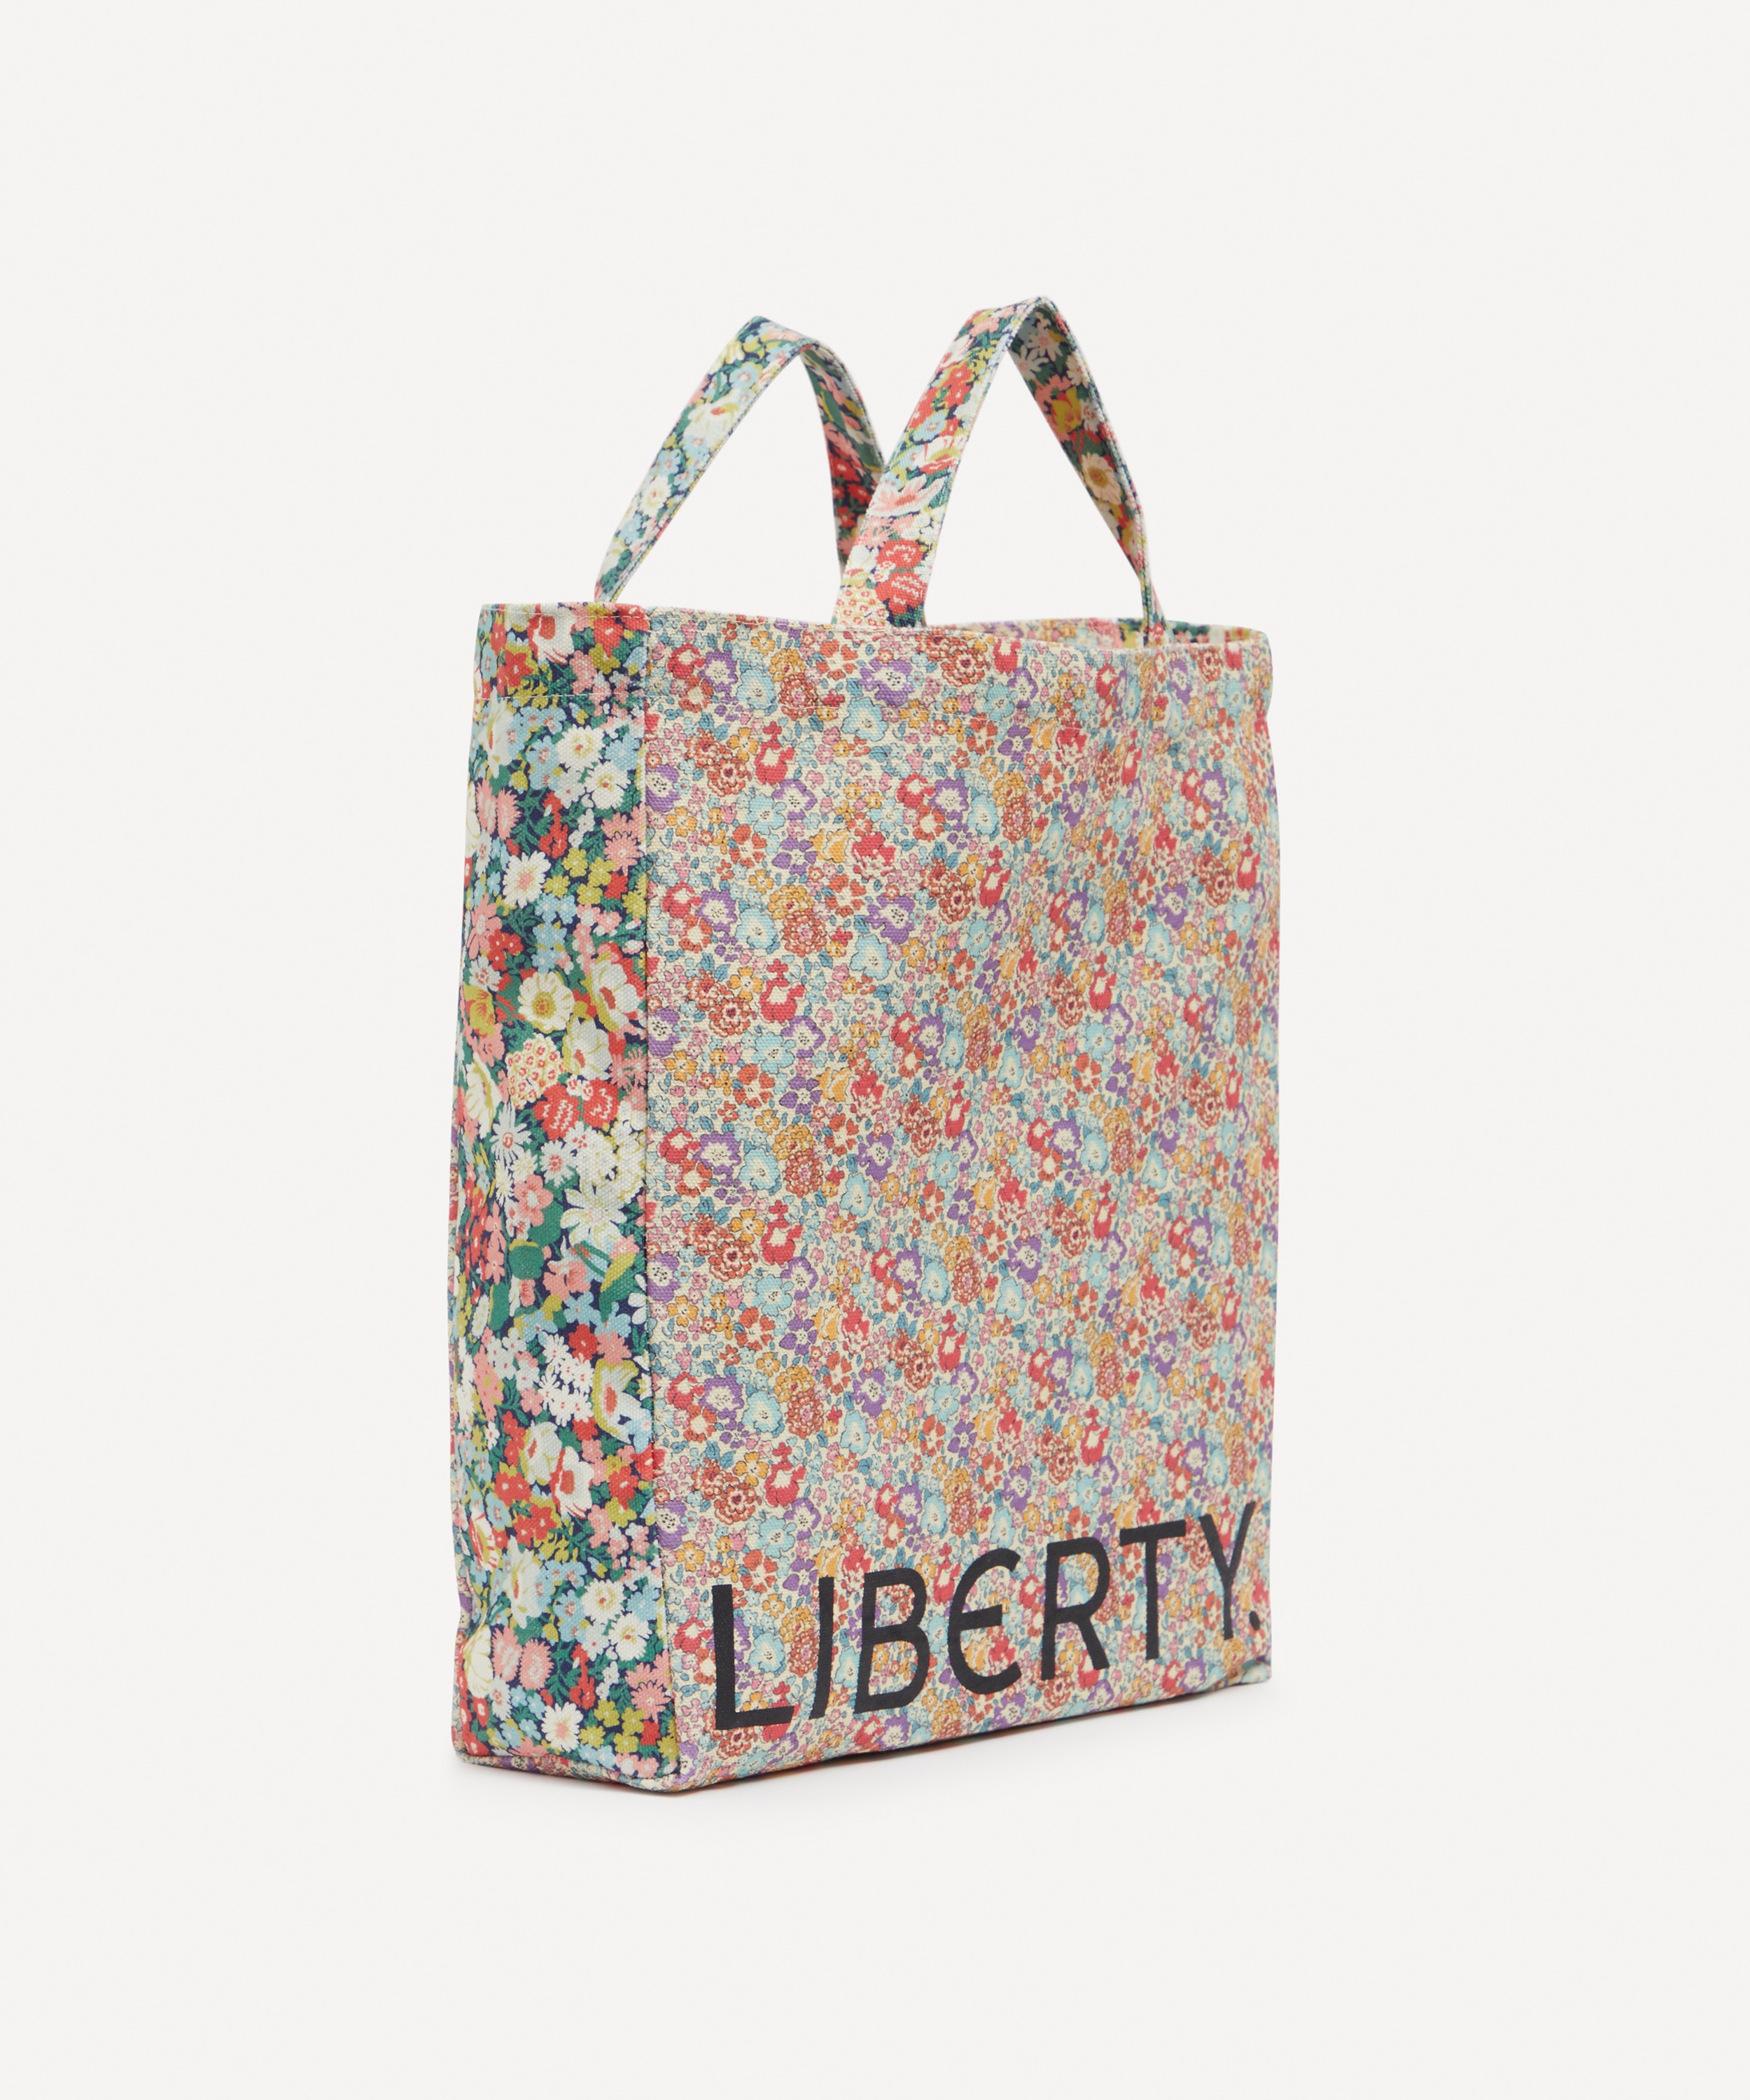 Printed coated cotton-canvas tote